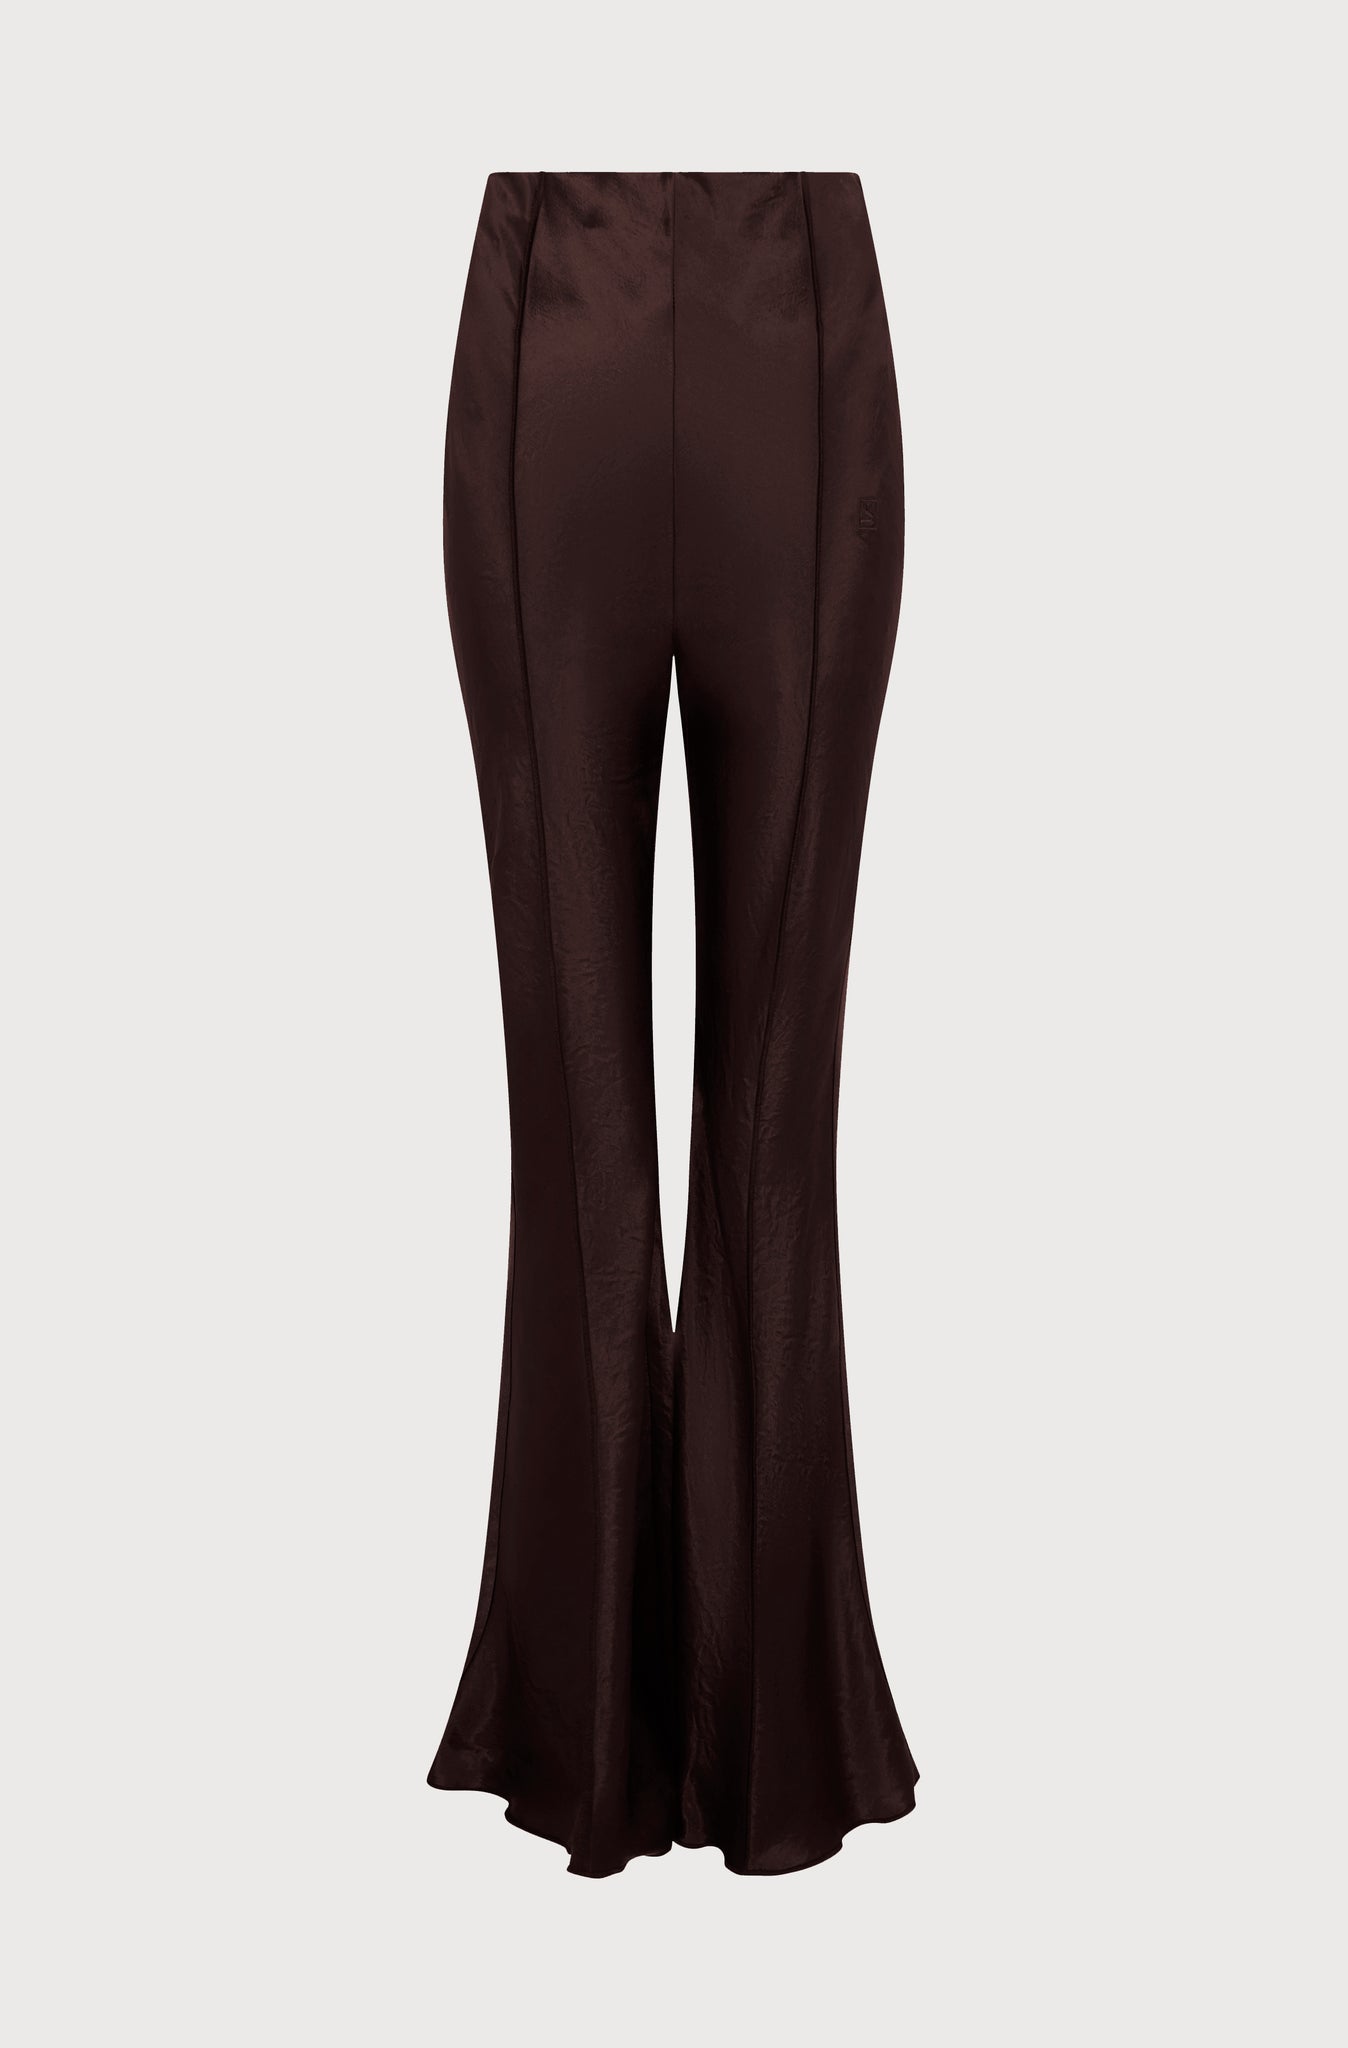 BABYLOCK FLARED TROUSERS - BROWN SATIN